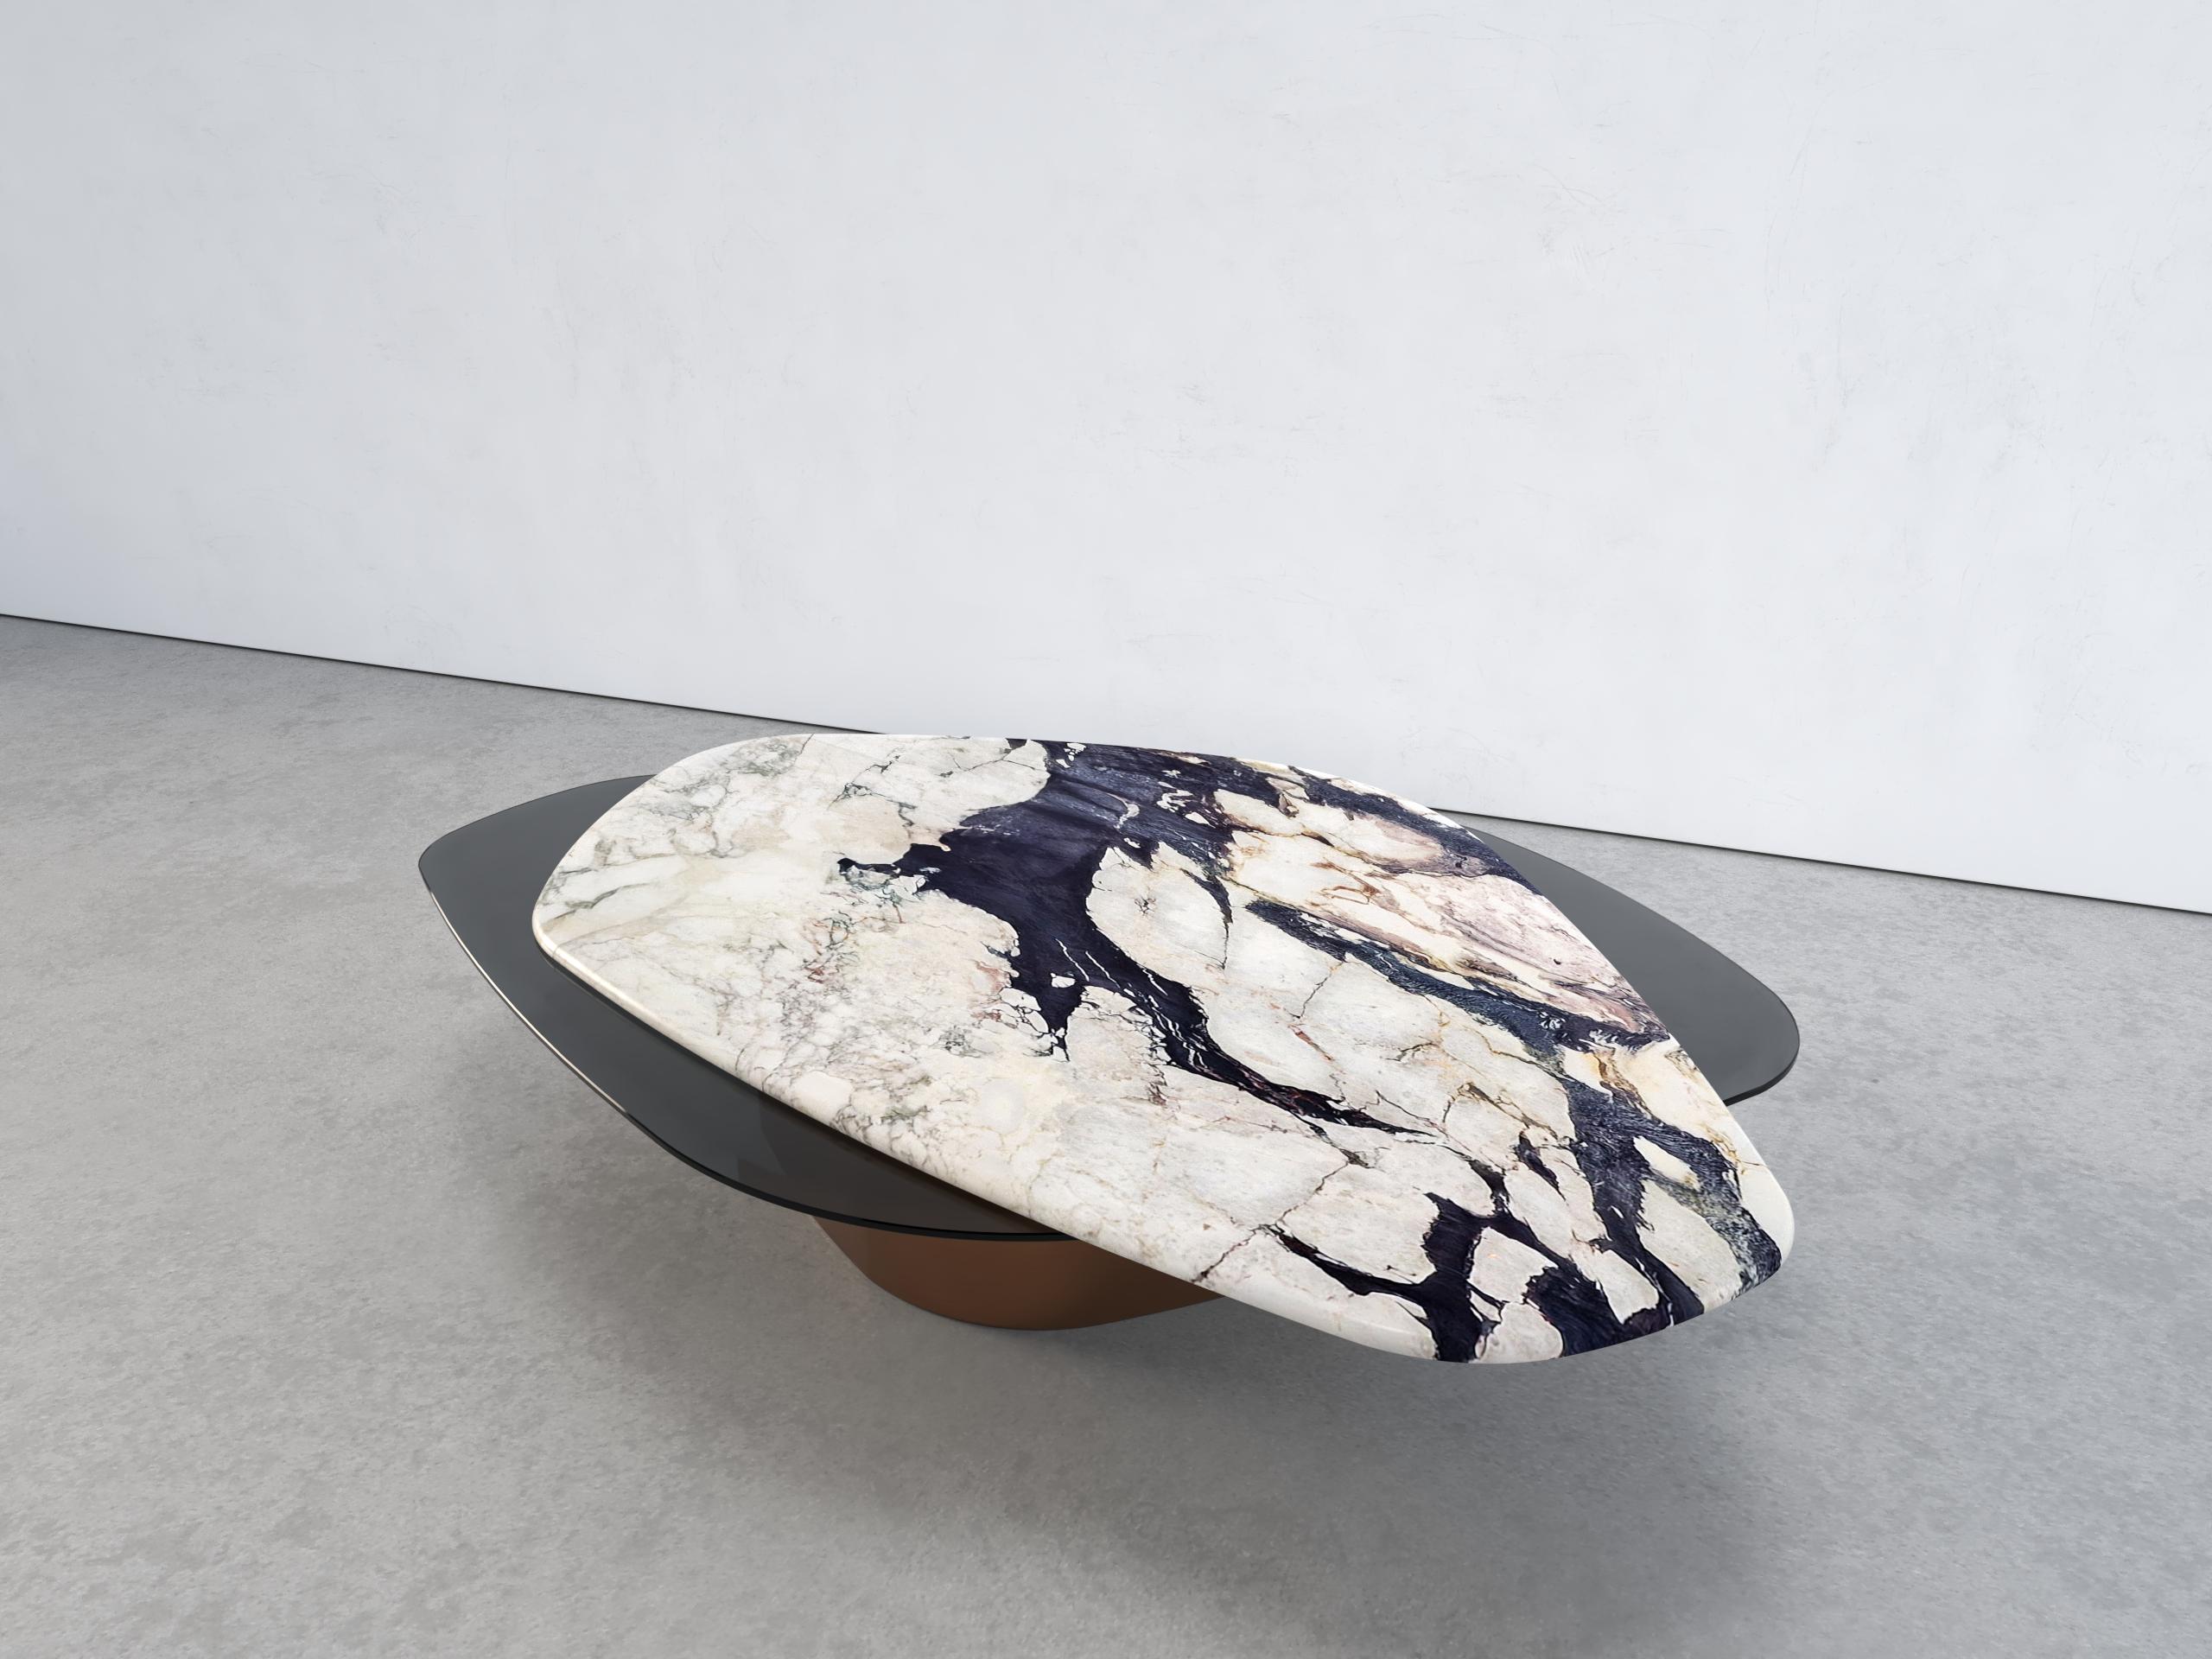 The elements VII coffee table, 1 of 1 by Grzegorz Majka
Edition 1 of 1
Dimensions:  W 172.7  x D 119.3 x H 35.5 cm
Materials: Glass, quartz and steel

“The Elements VII” - contemporary center coffee table ft. Calacatta Vagli Viola marble and